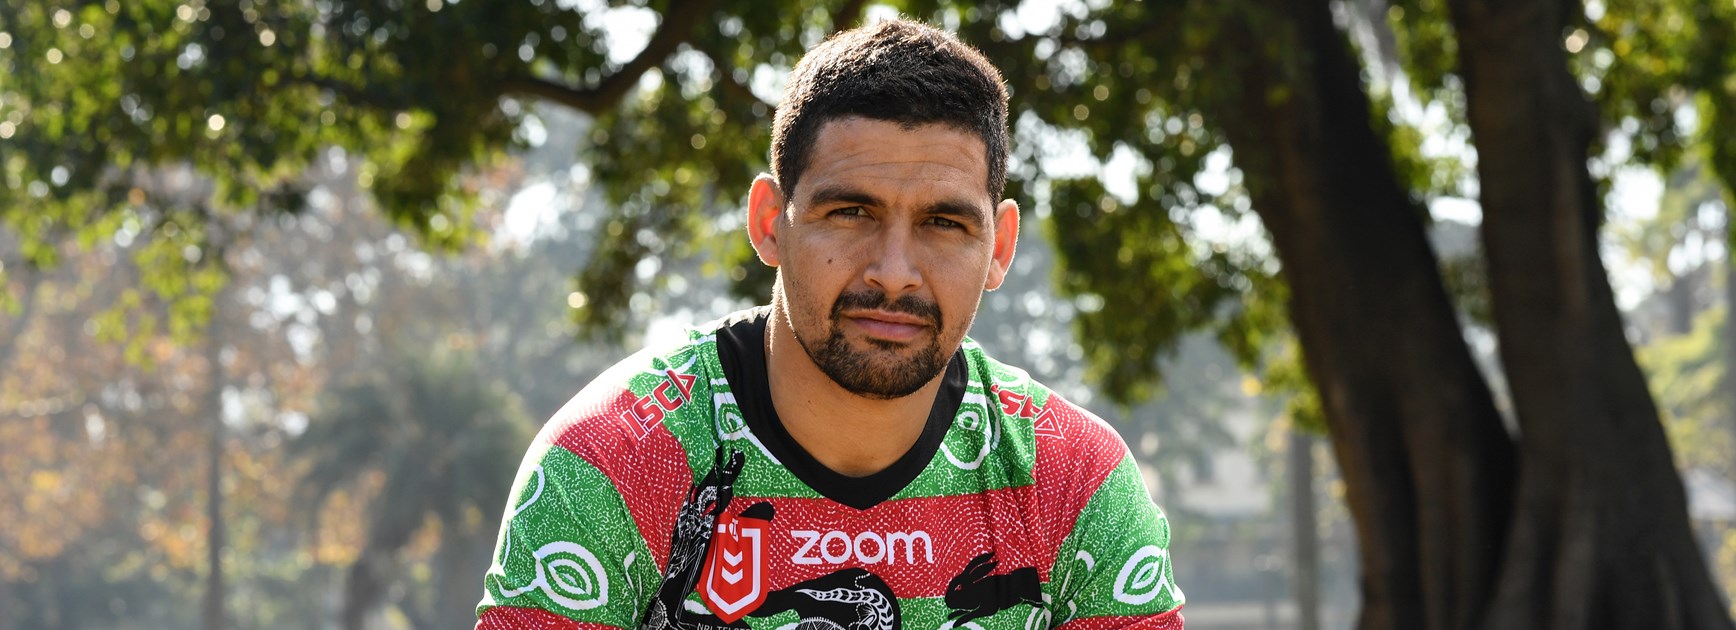 Cody commits: Walker signs new Rabbitohs deal until end of 2022